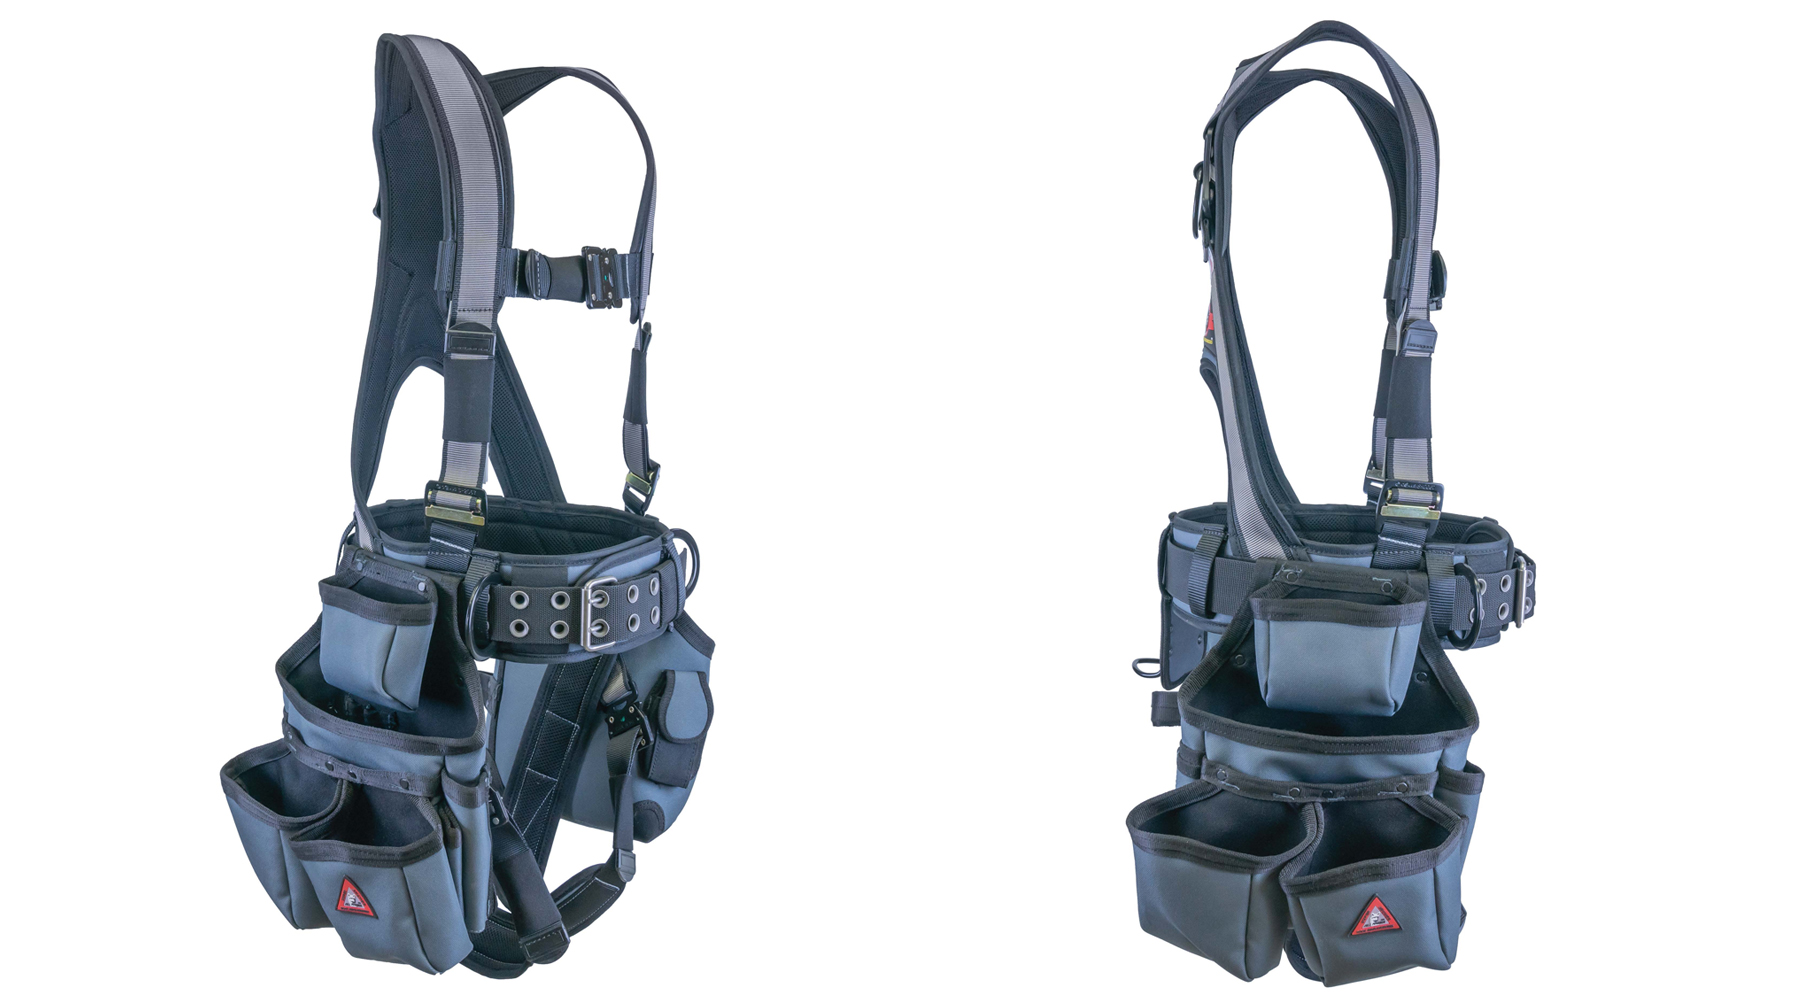 Super Anchor Safety 6151-RL Deluxe Full Body Harness plus All-Pakka Tool Bag Combo Large Red